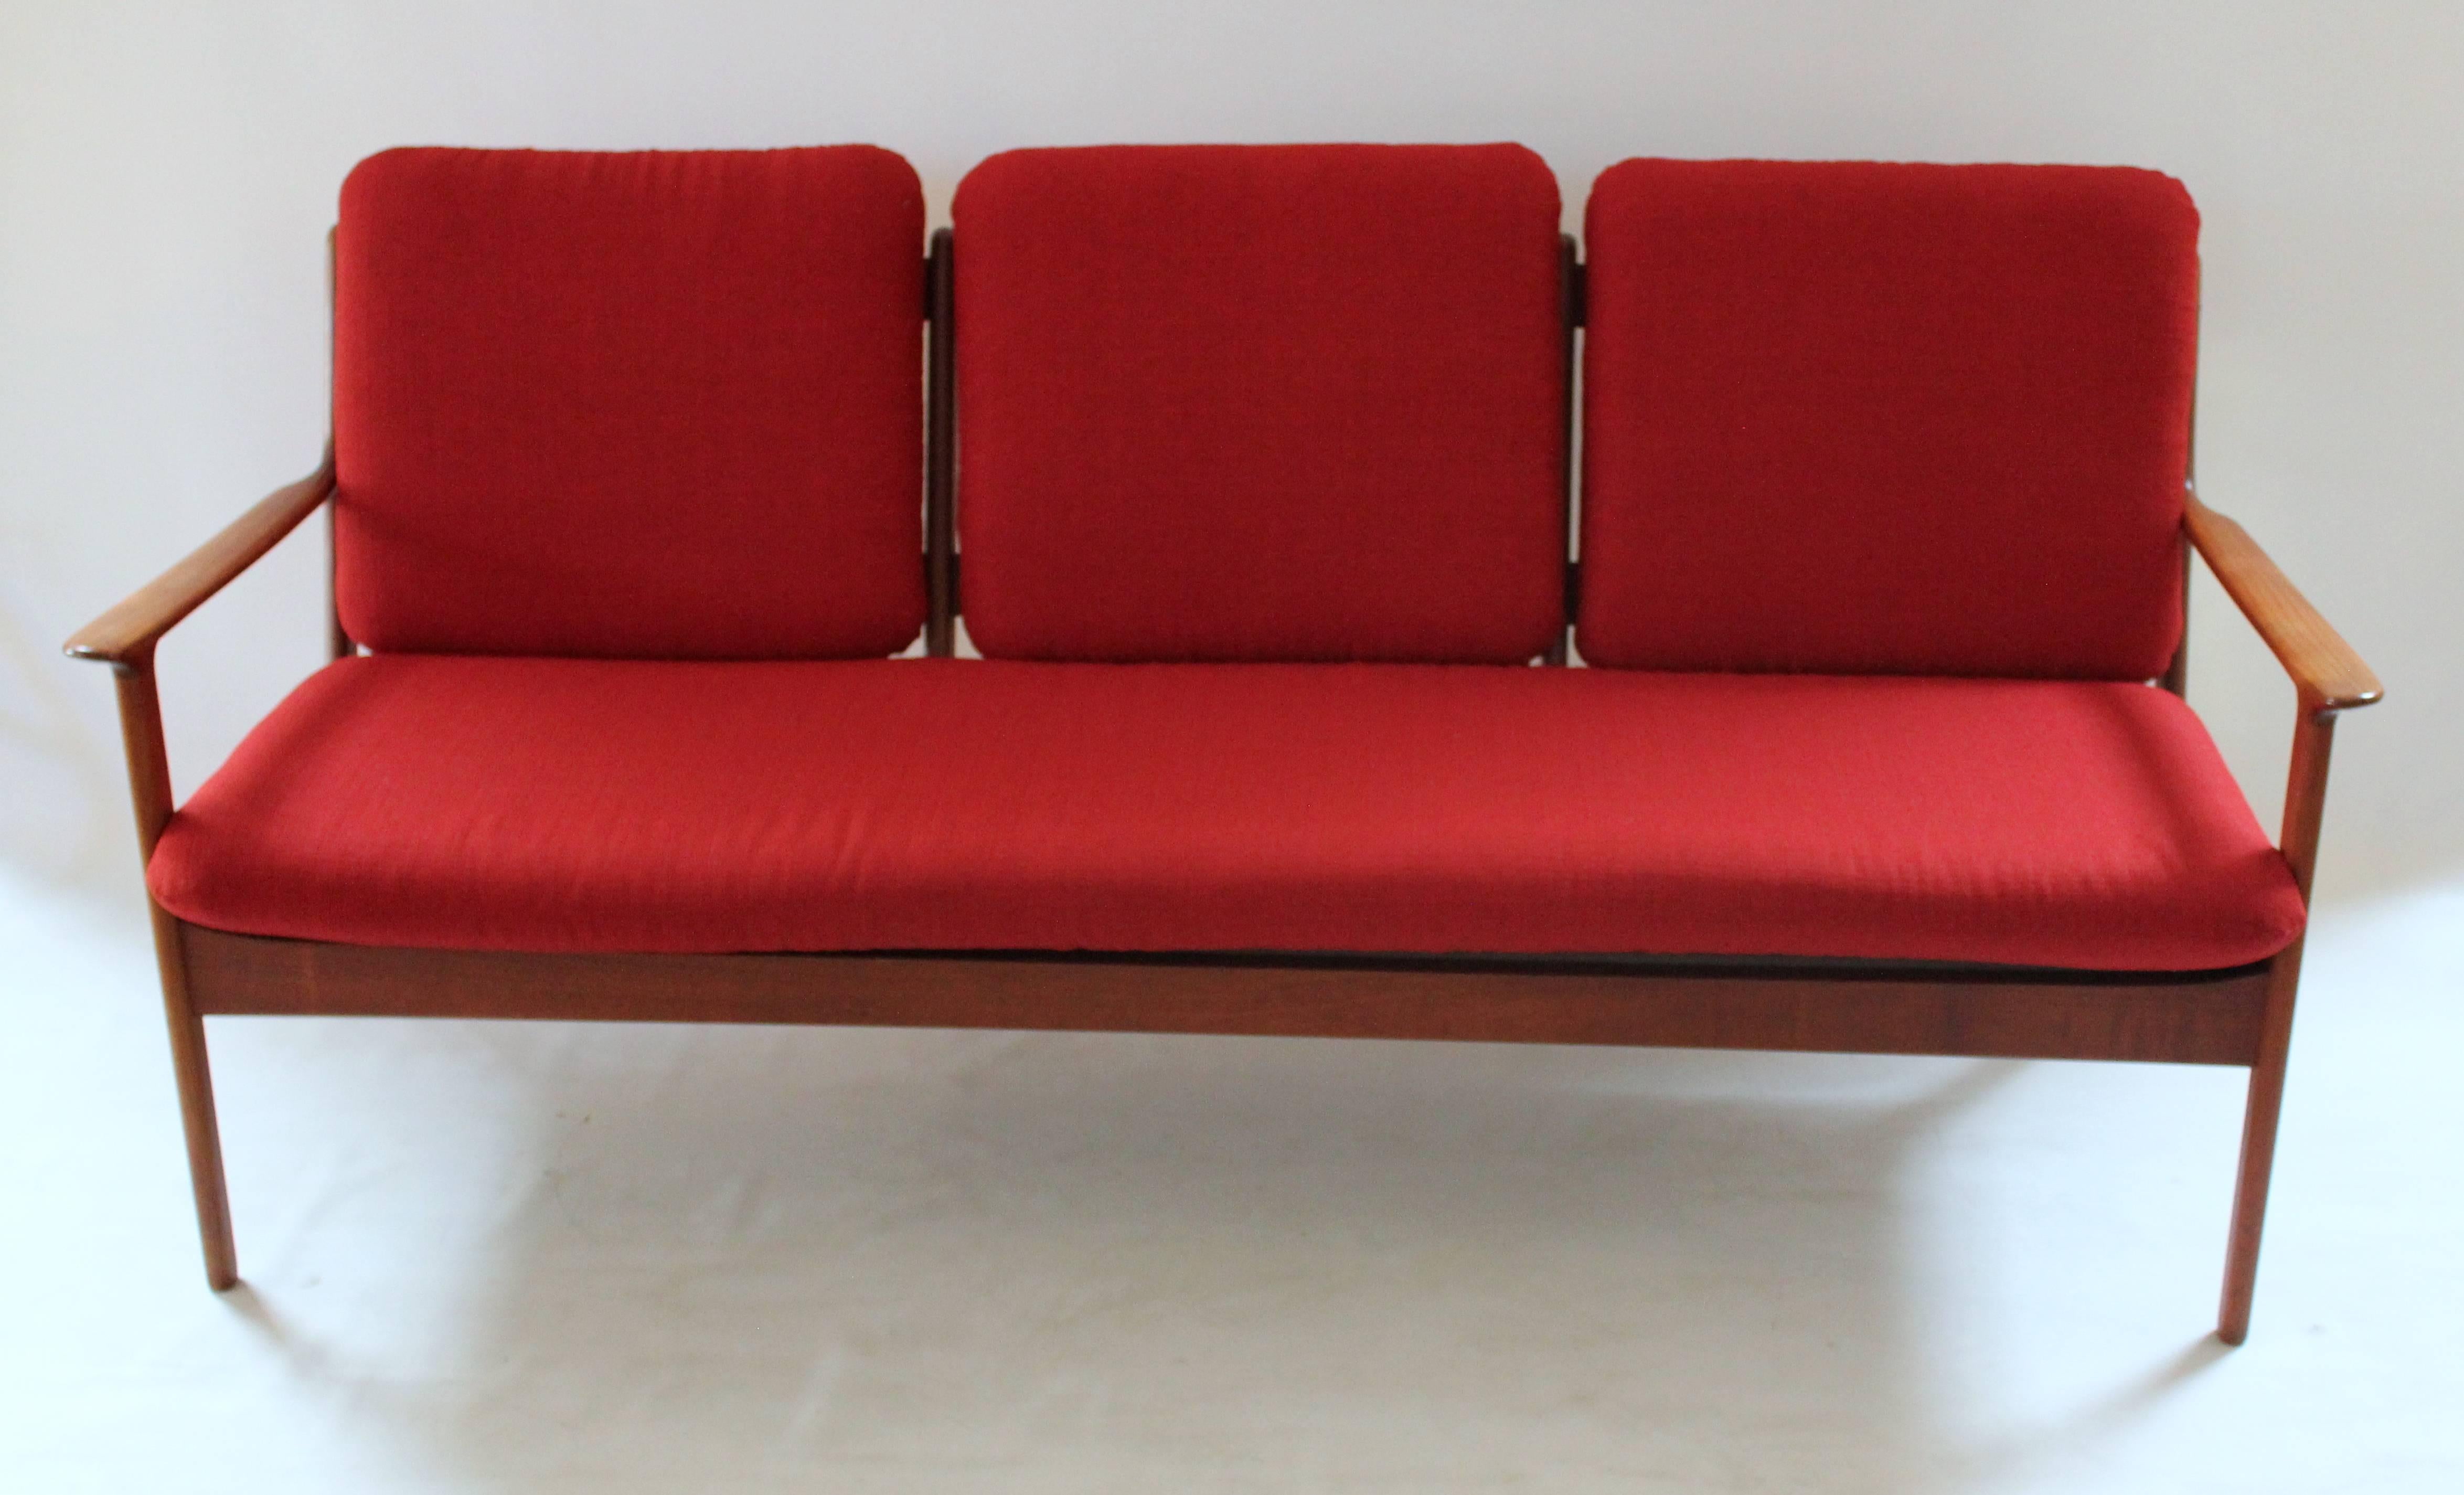 1960 Danish Modern teak sofa by Ole Wanscher. Cushions have been professionally reupholstered with new fabric. Marked with Ole Wanscher and Danish Control stamps.